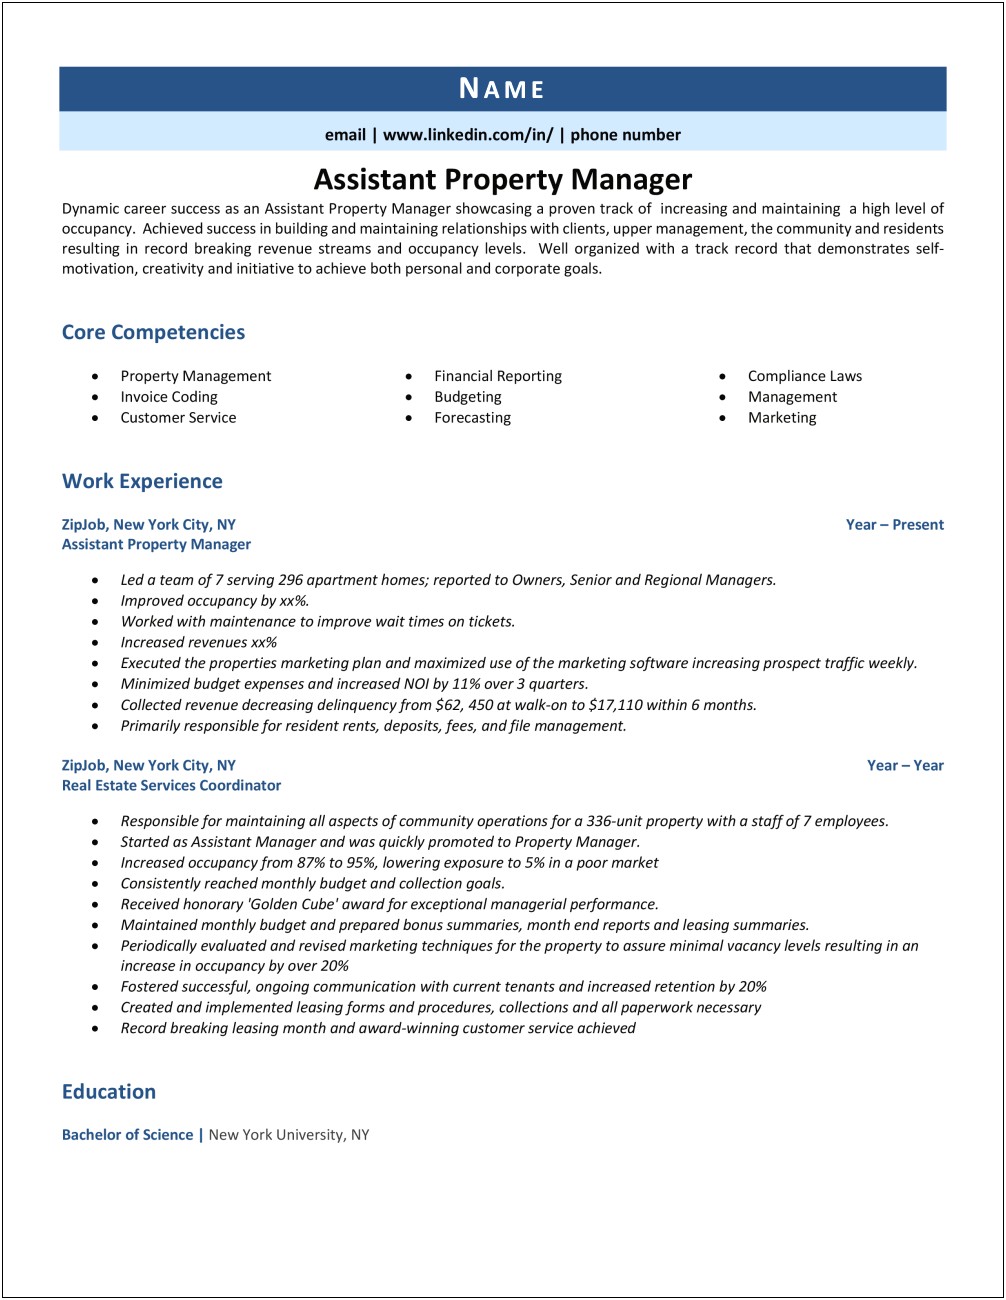 Resume For Assistant Property Manager Position